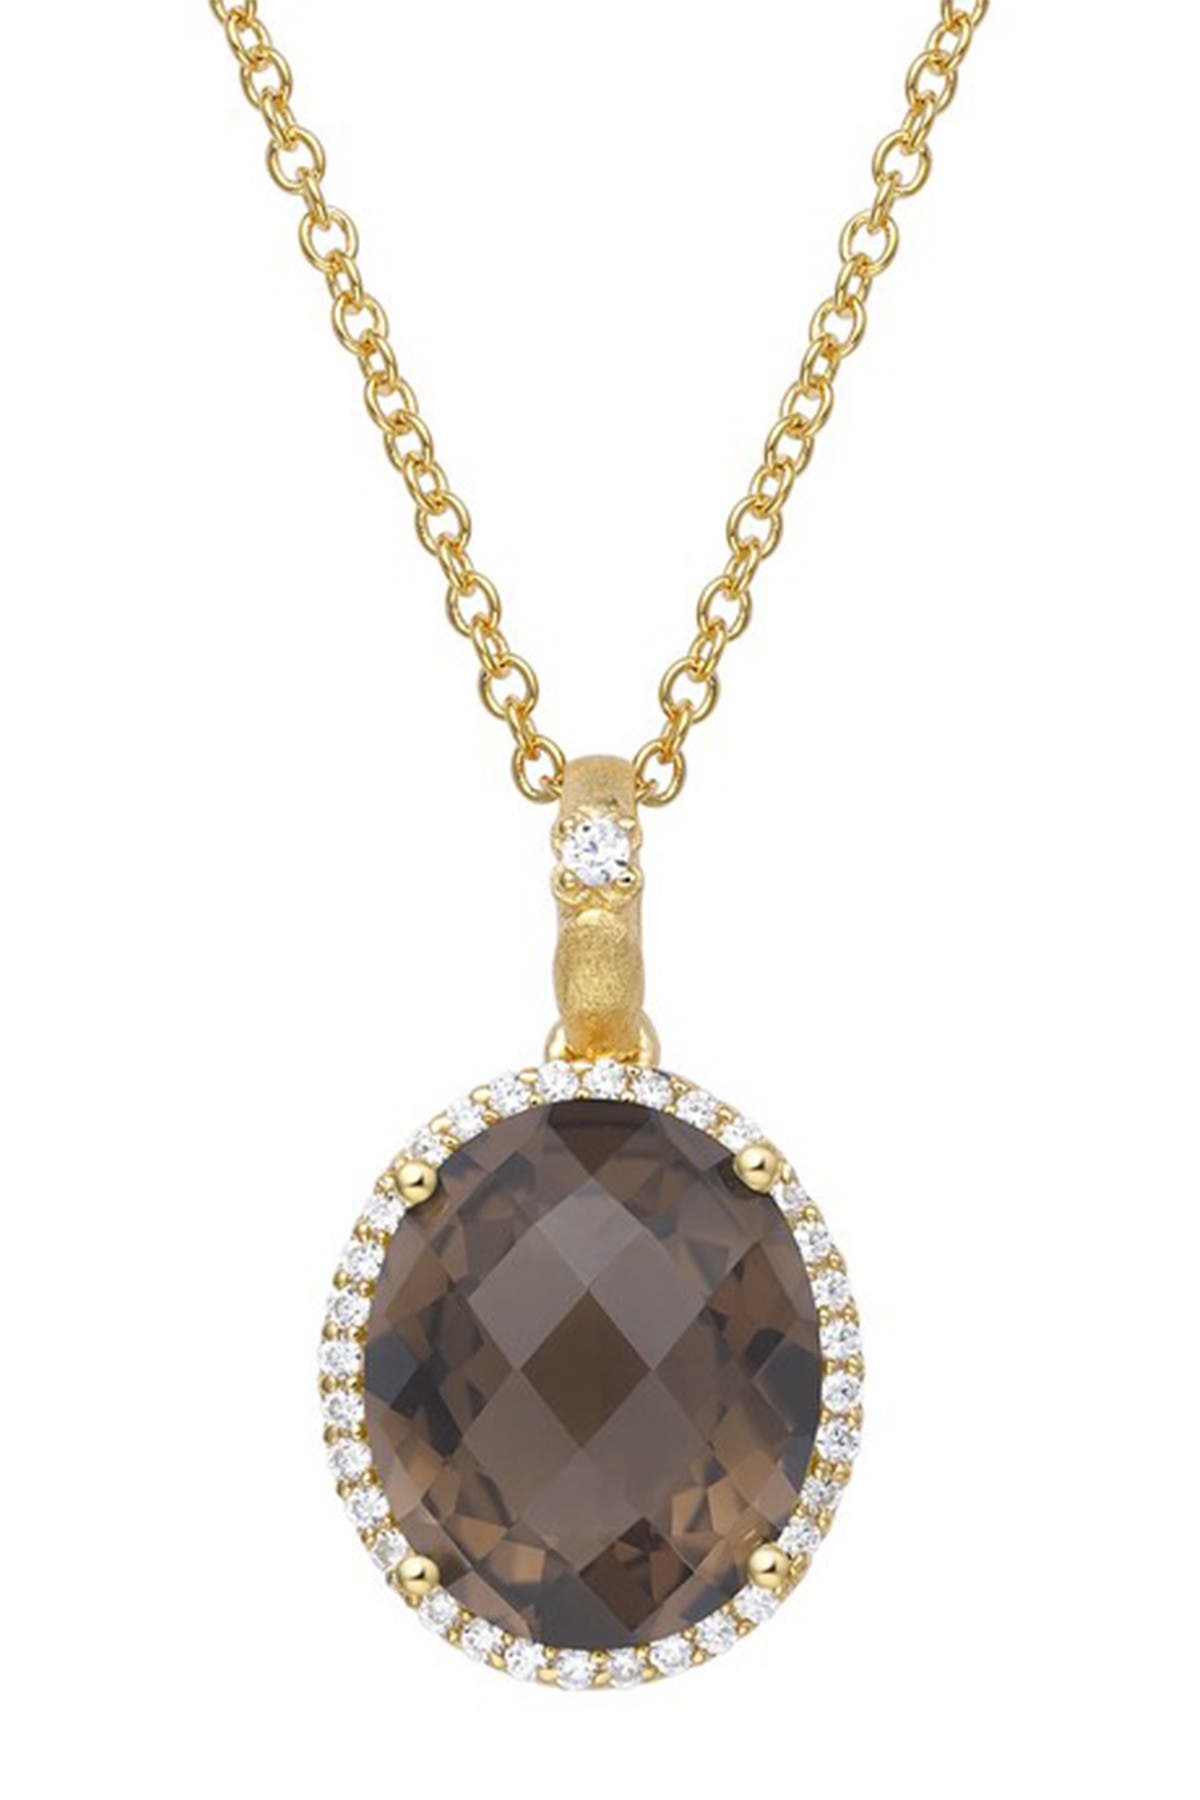 Lafonn Gold Plated Sterling Silver Round Cut Simulated Diamond Pendant Chain Necklace In White-smoky Quartz